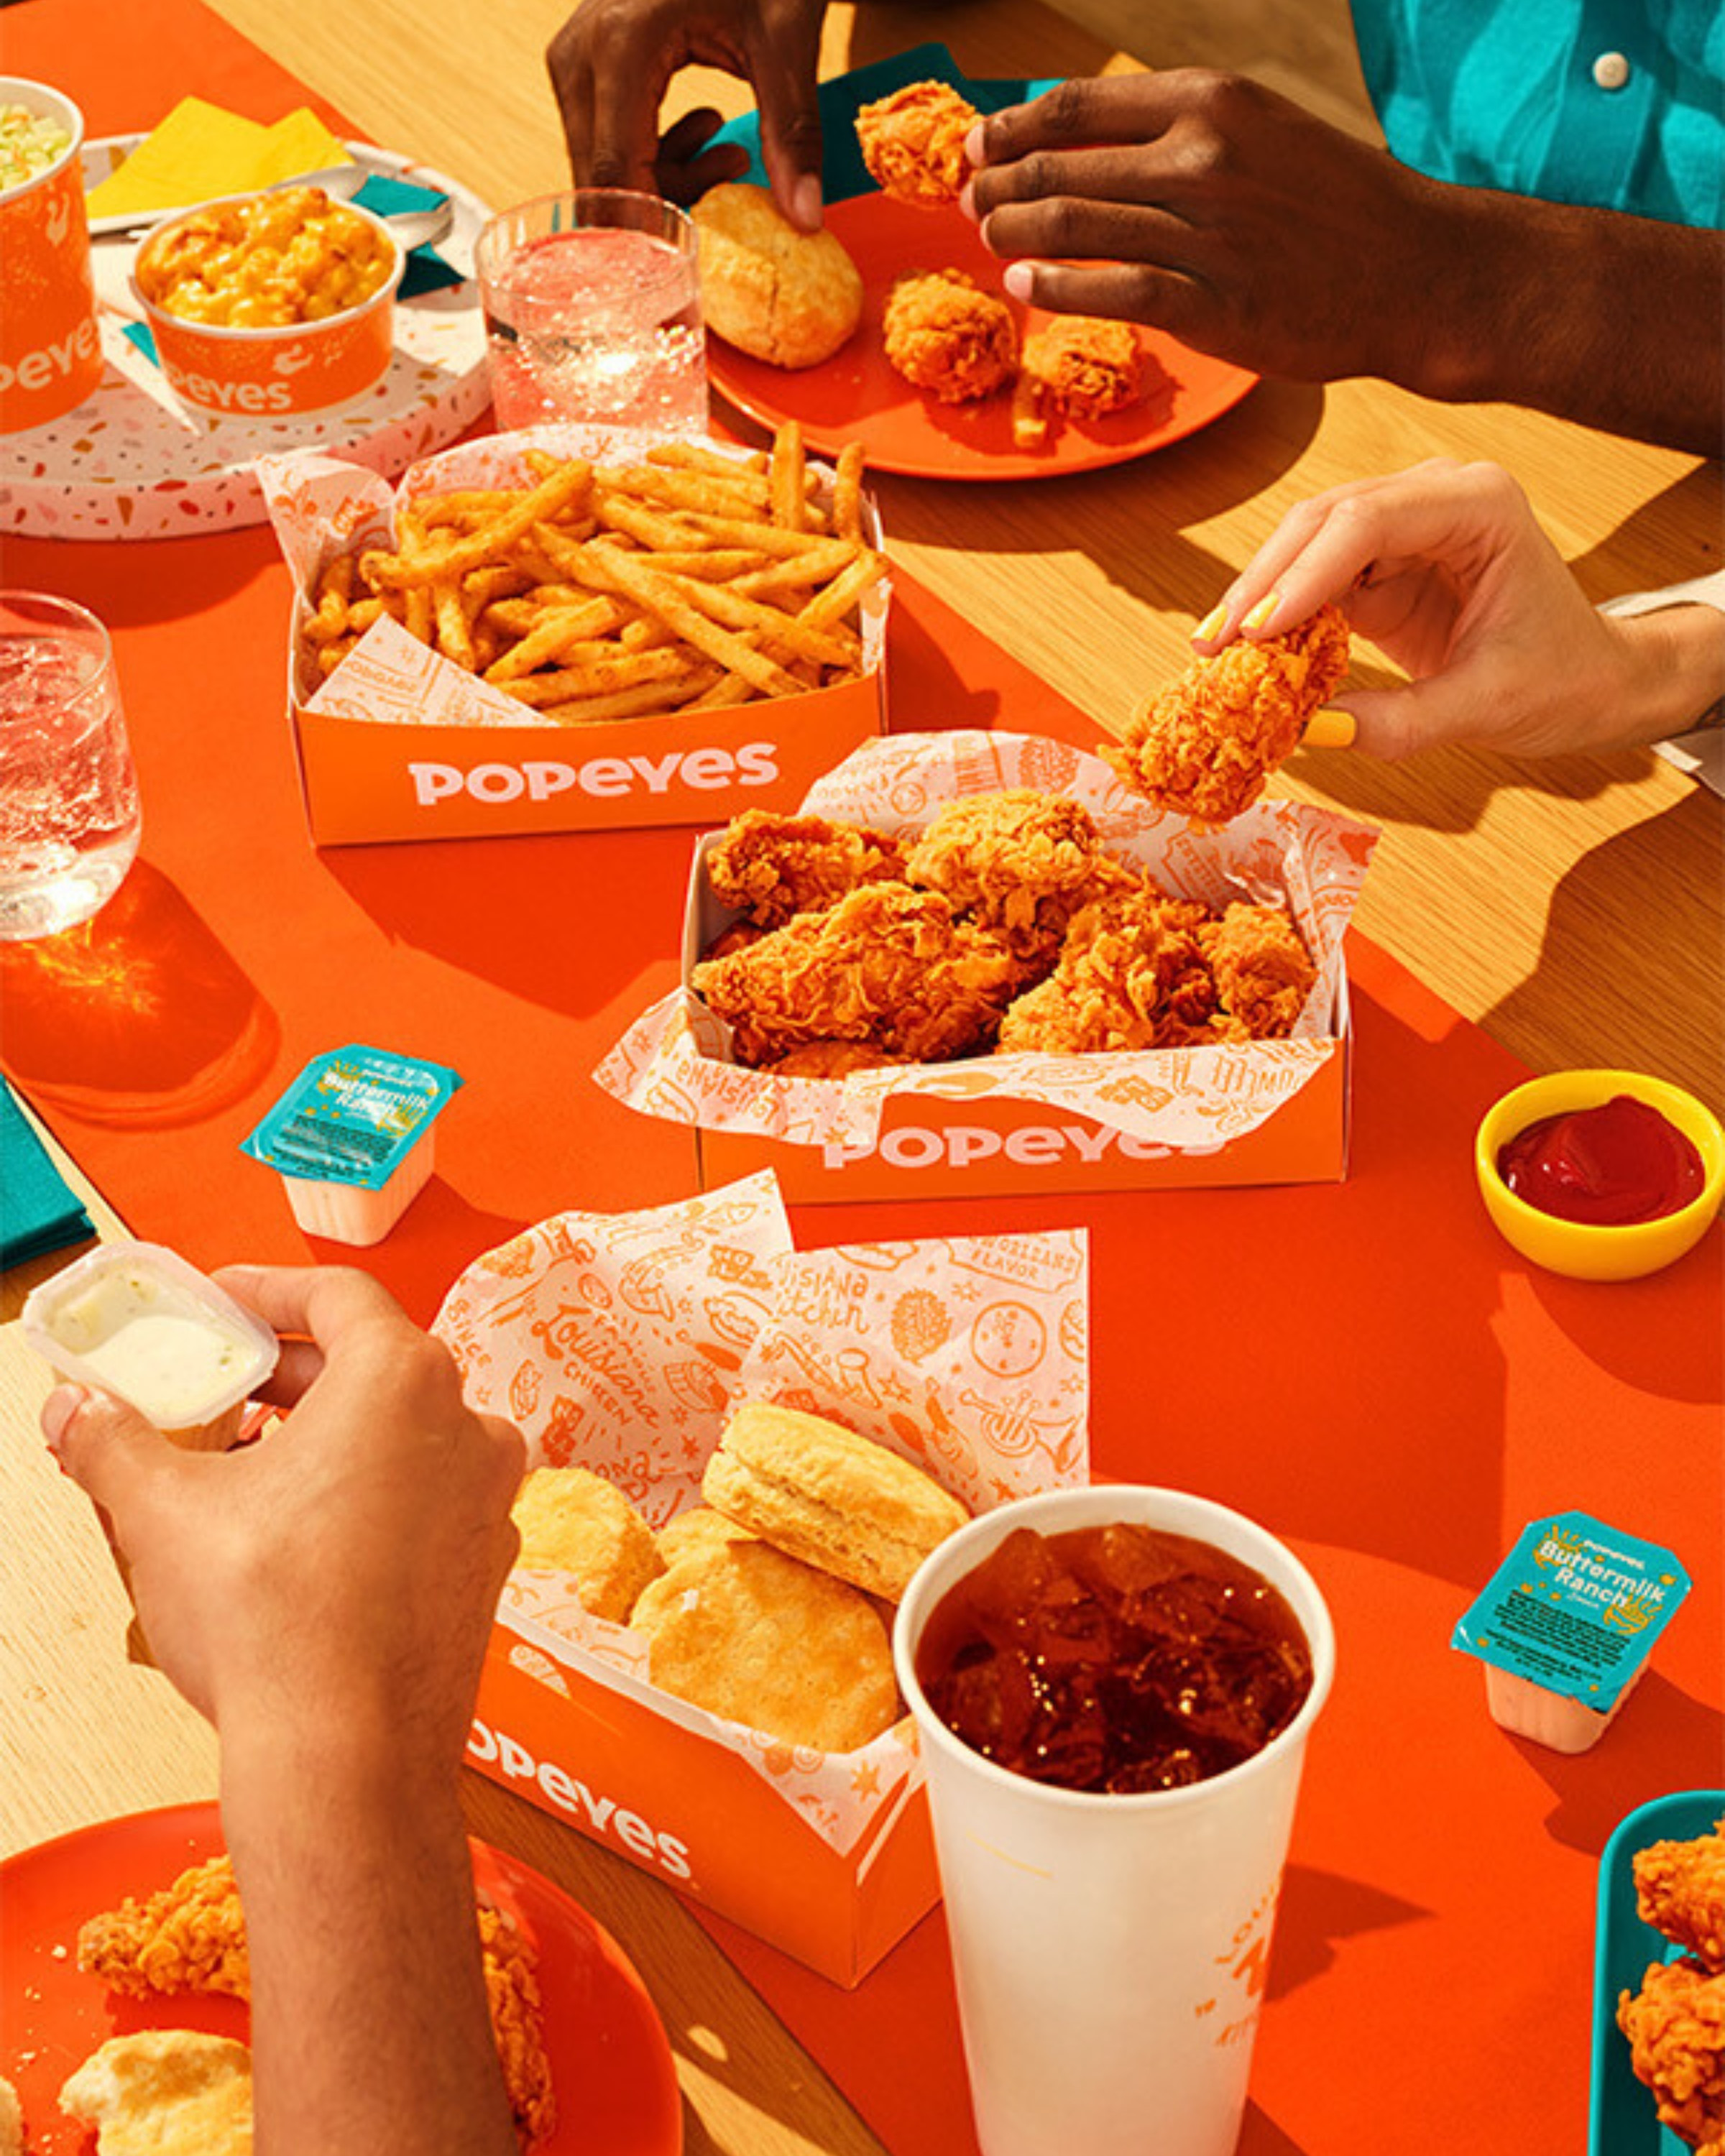 Table of food from fried chicken chain Popeyes that will soon open in New Zealand